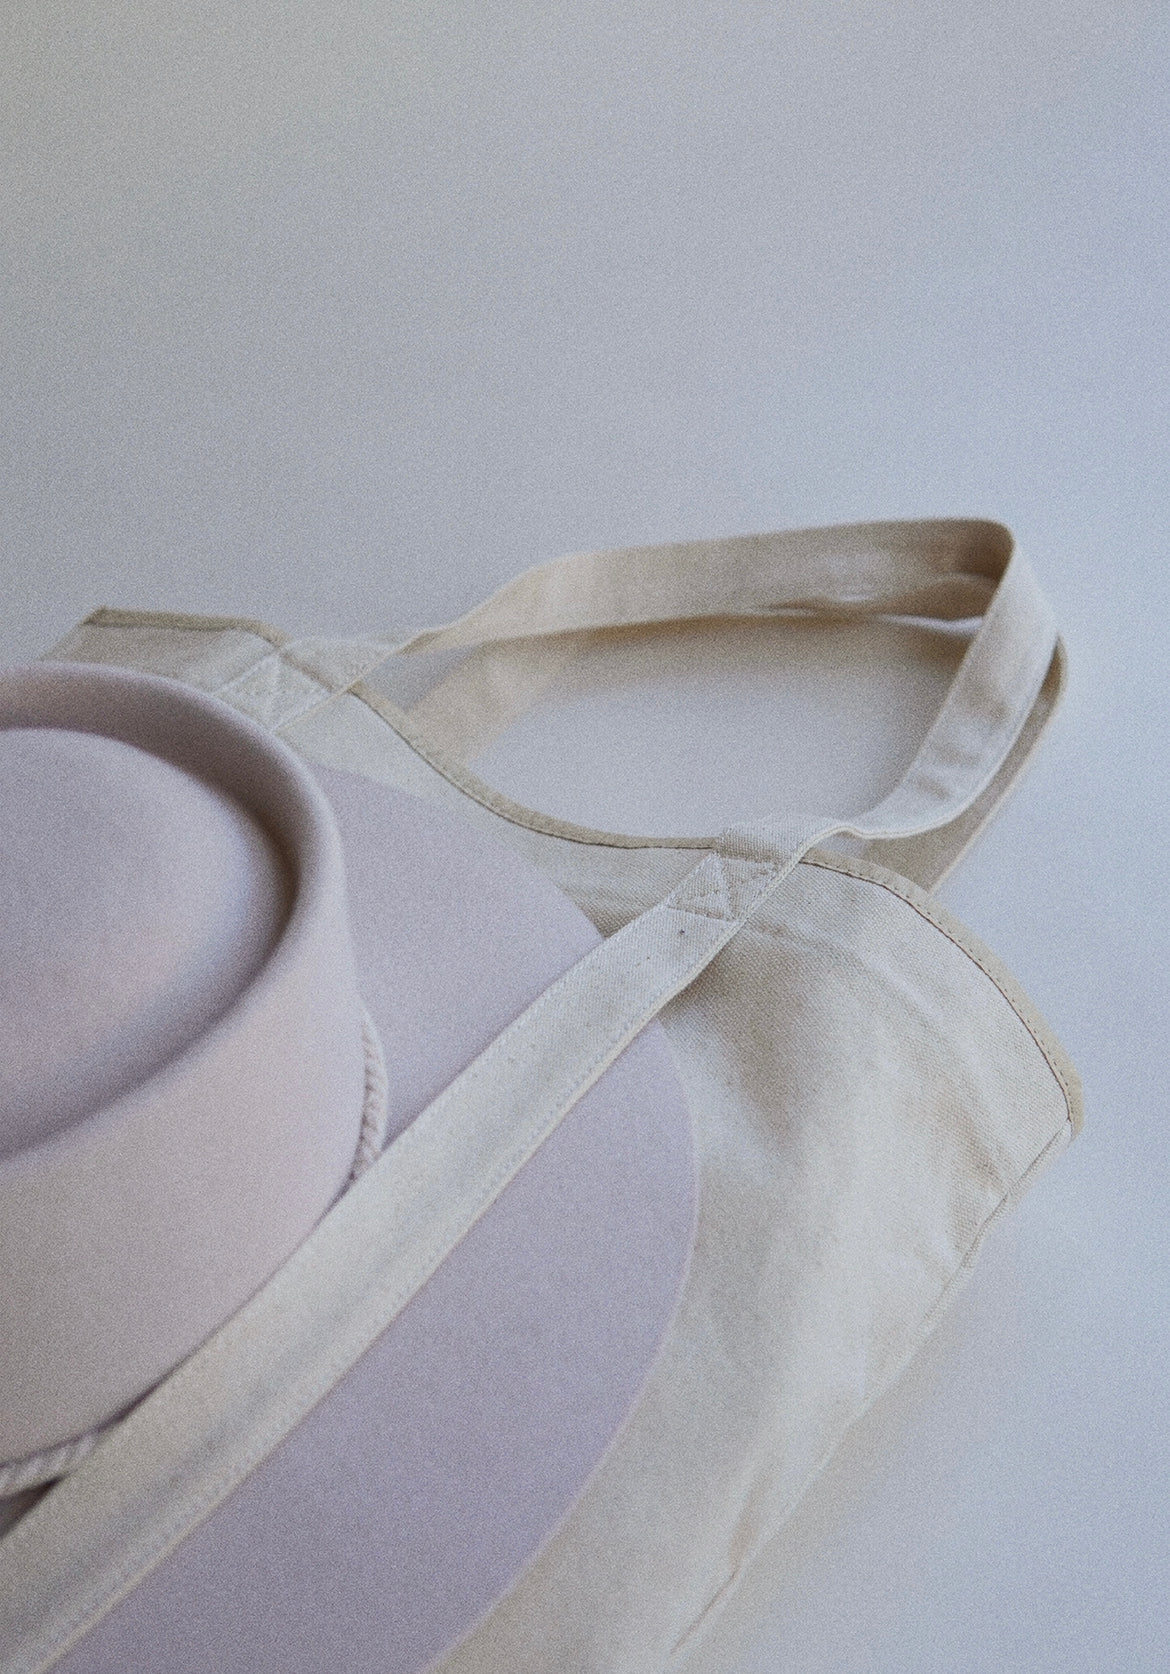 Hat travel tote bag, hat travel bag, tote bag with pockets, beach bag with hat holder, hat travel, carry on 